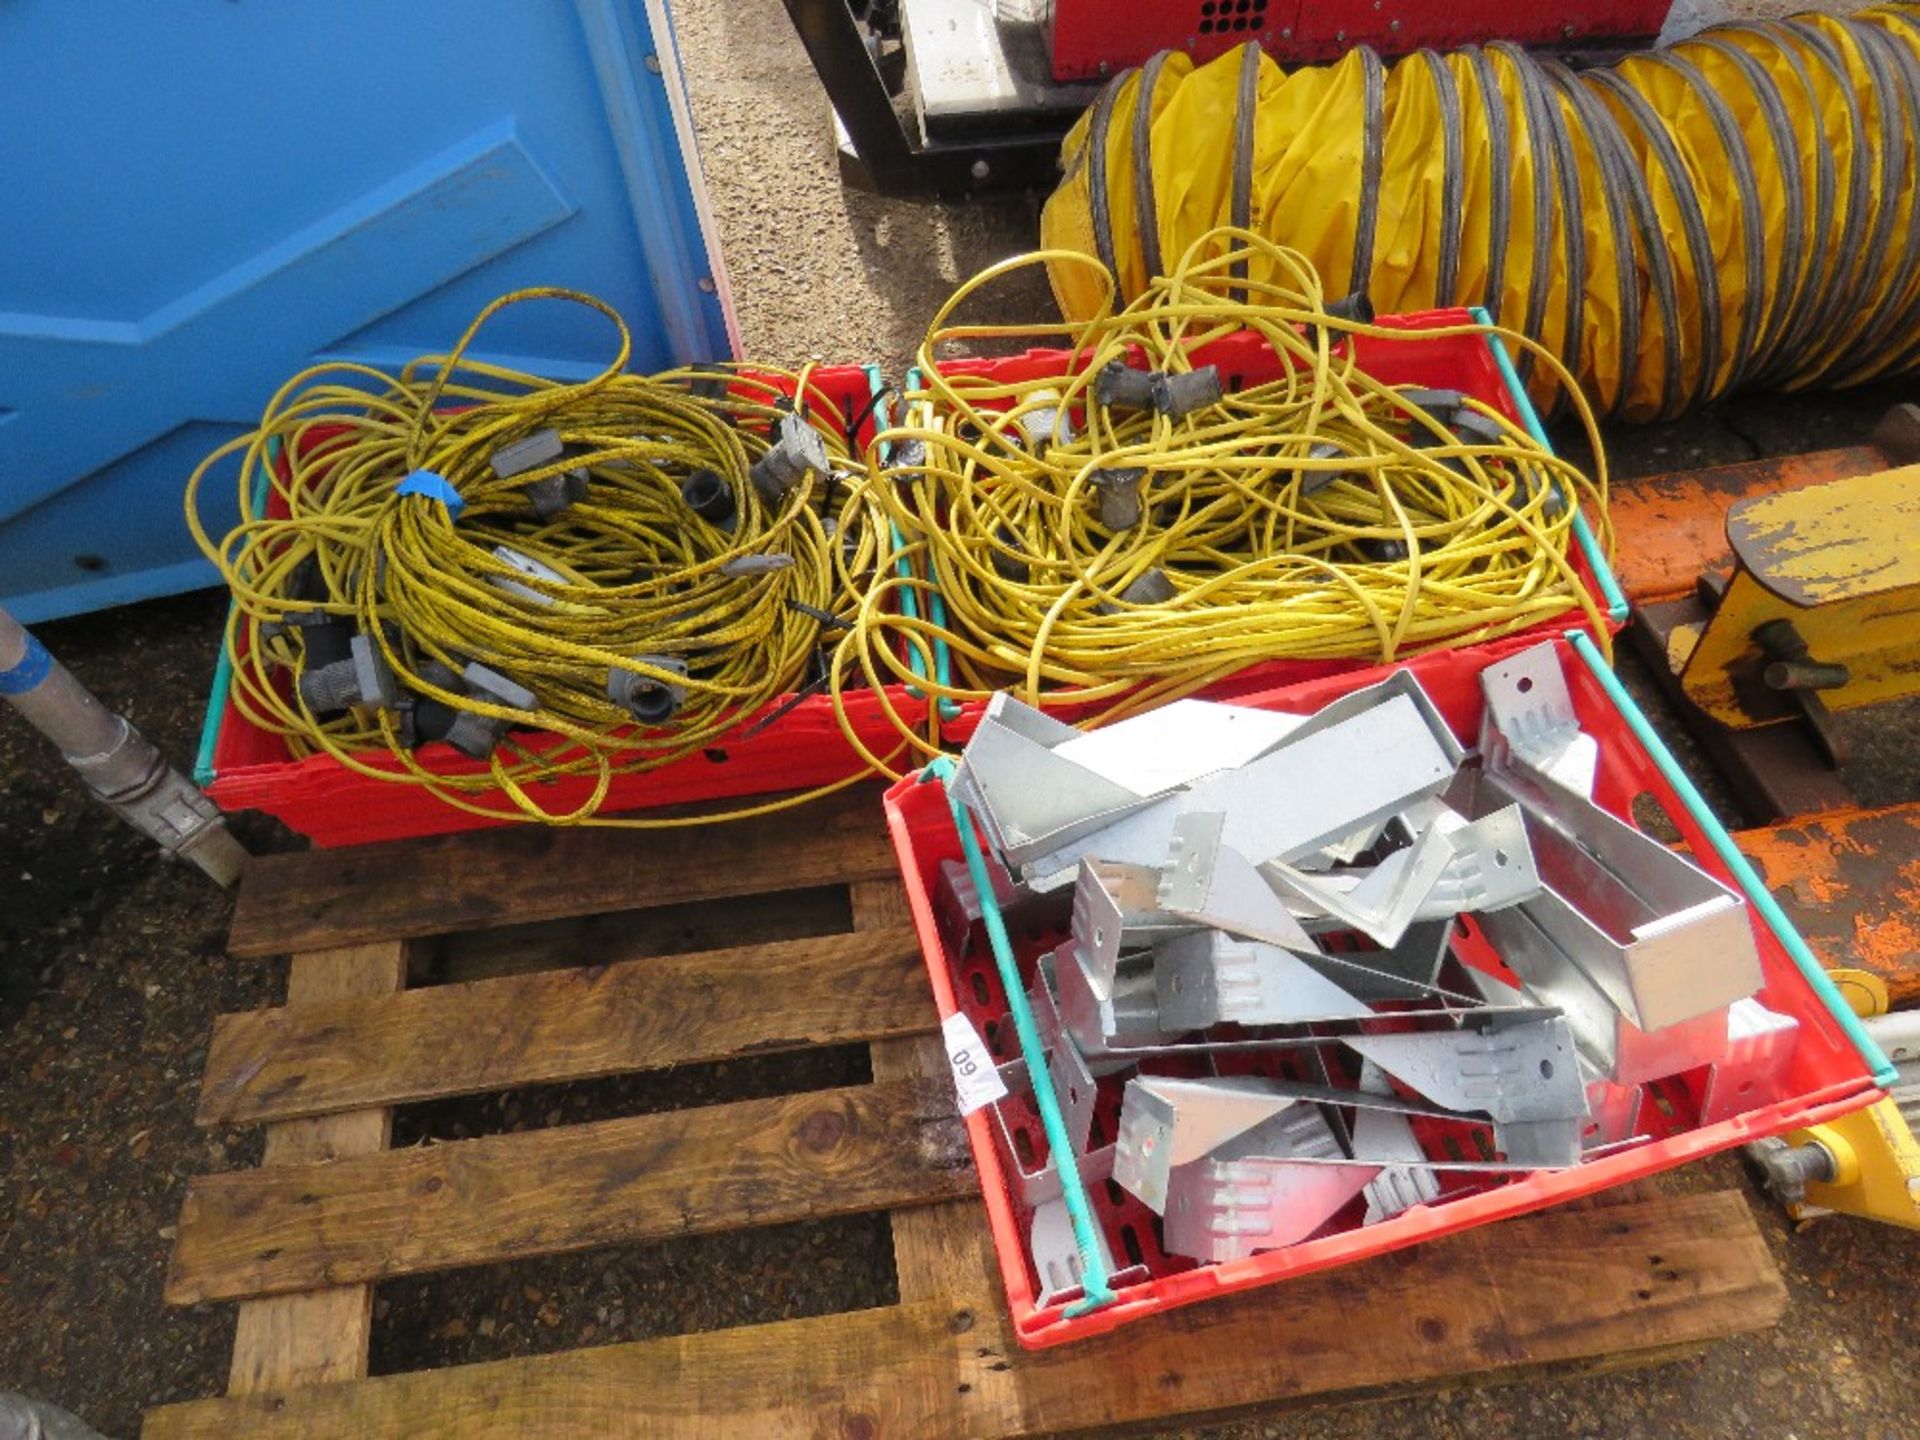 2no. Boxes of cables plus box of joist hangers